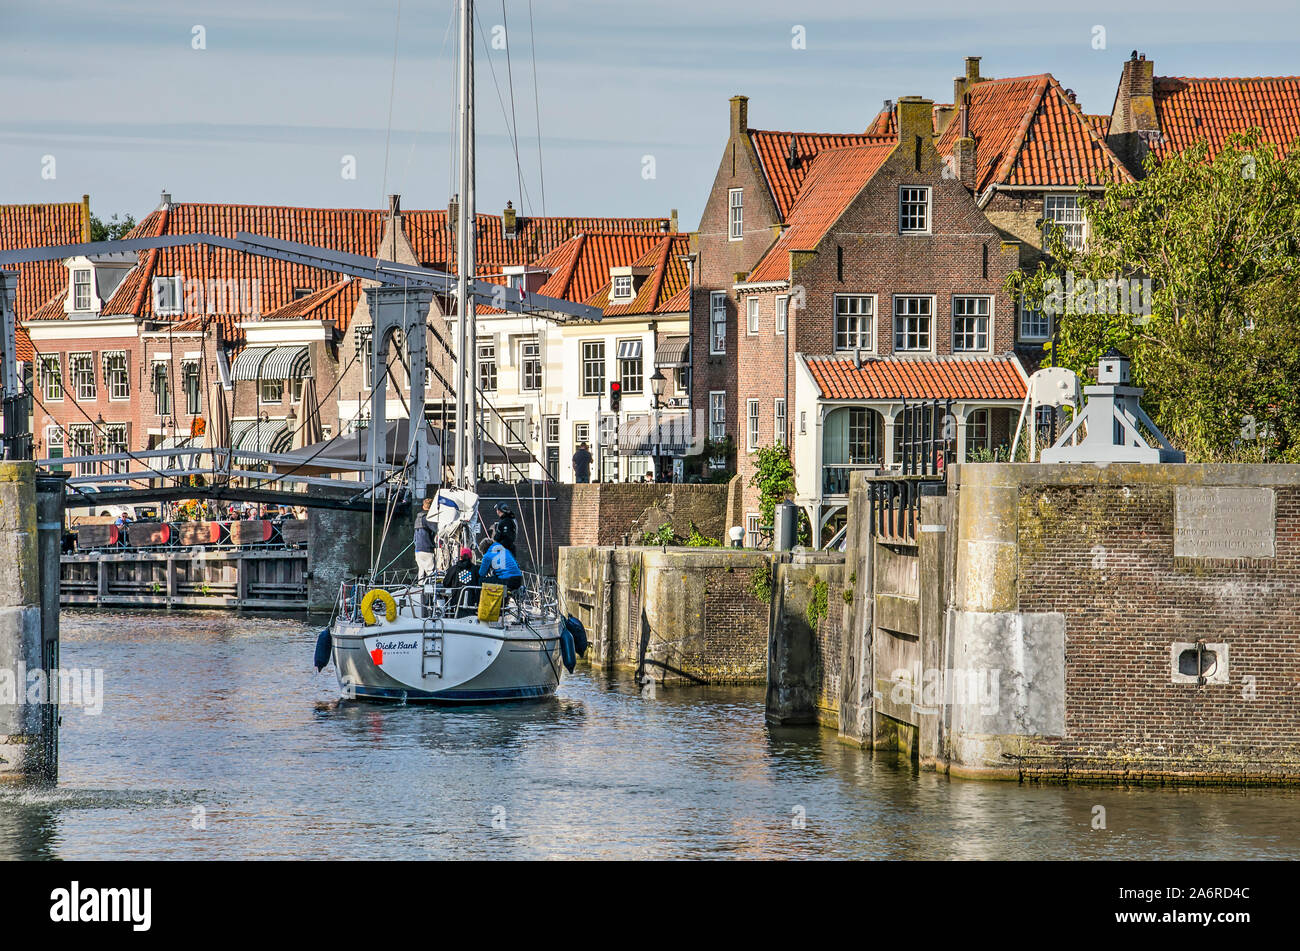 Enkhuizen, The Netherlands, September 13, 2019: motored modern sailing yacht approaching a pedestrian bridge in the old town Stock Photo